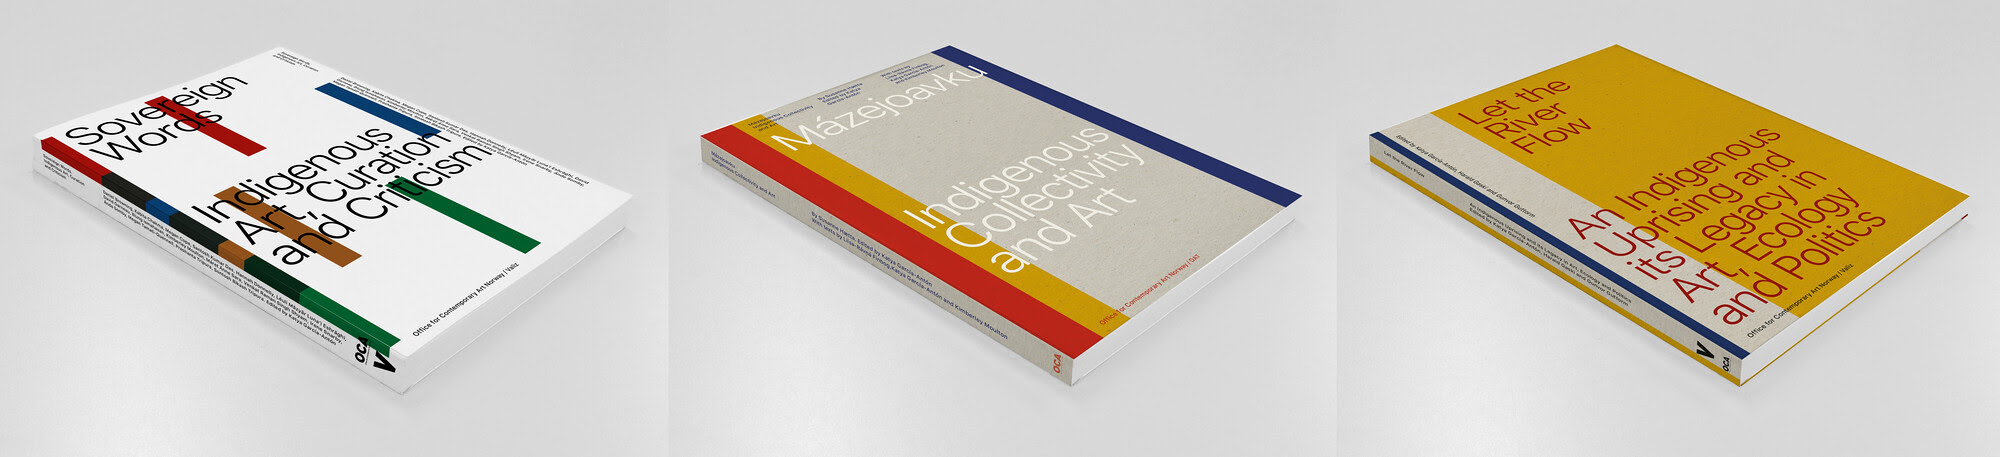 Out now: a trilogy of new Indigenous writing, published by Office for Contemporary Art Norway (OCA)